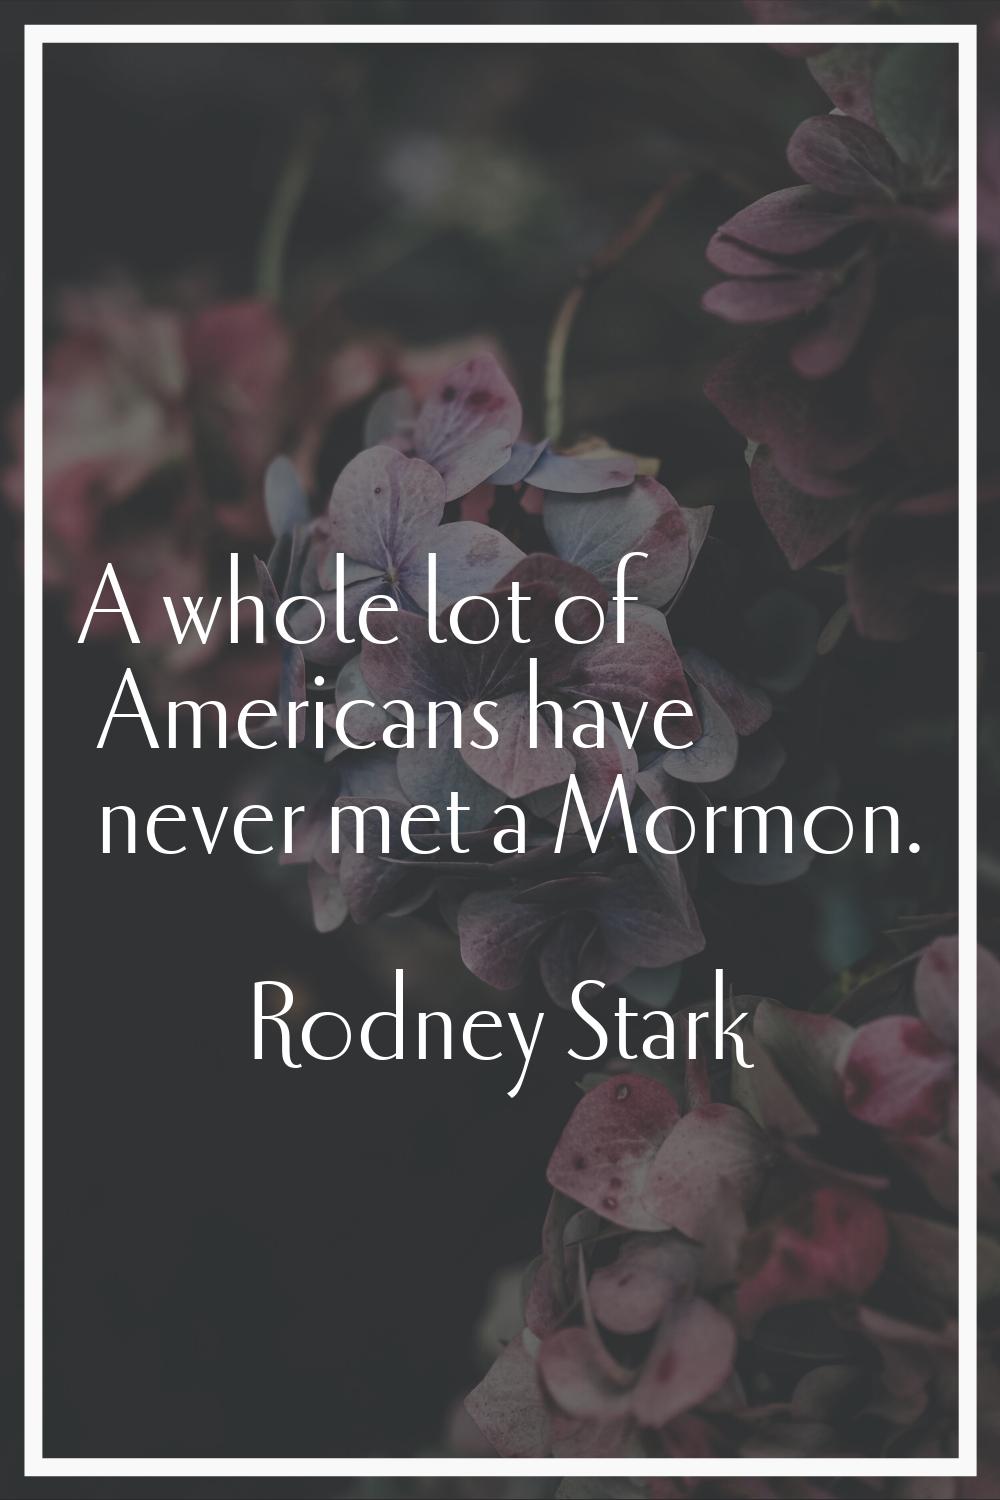 A whole lot of Americans have never met a Mormon.